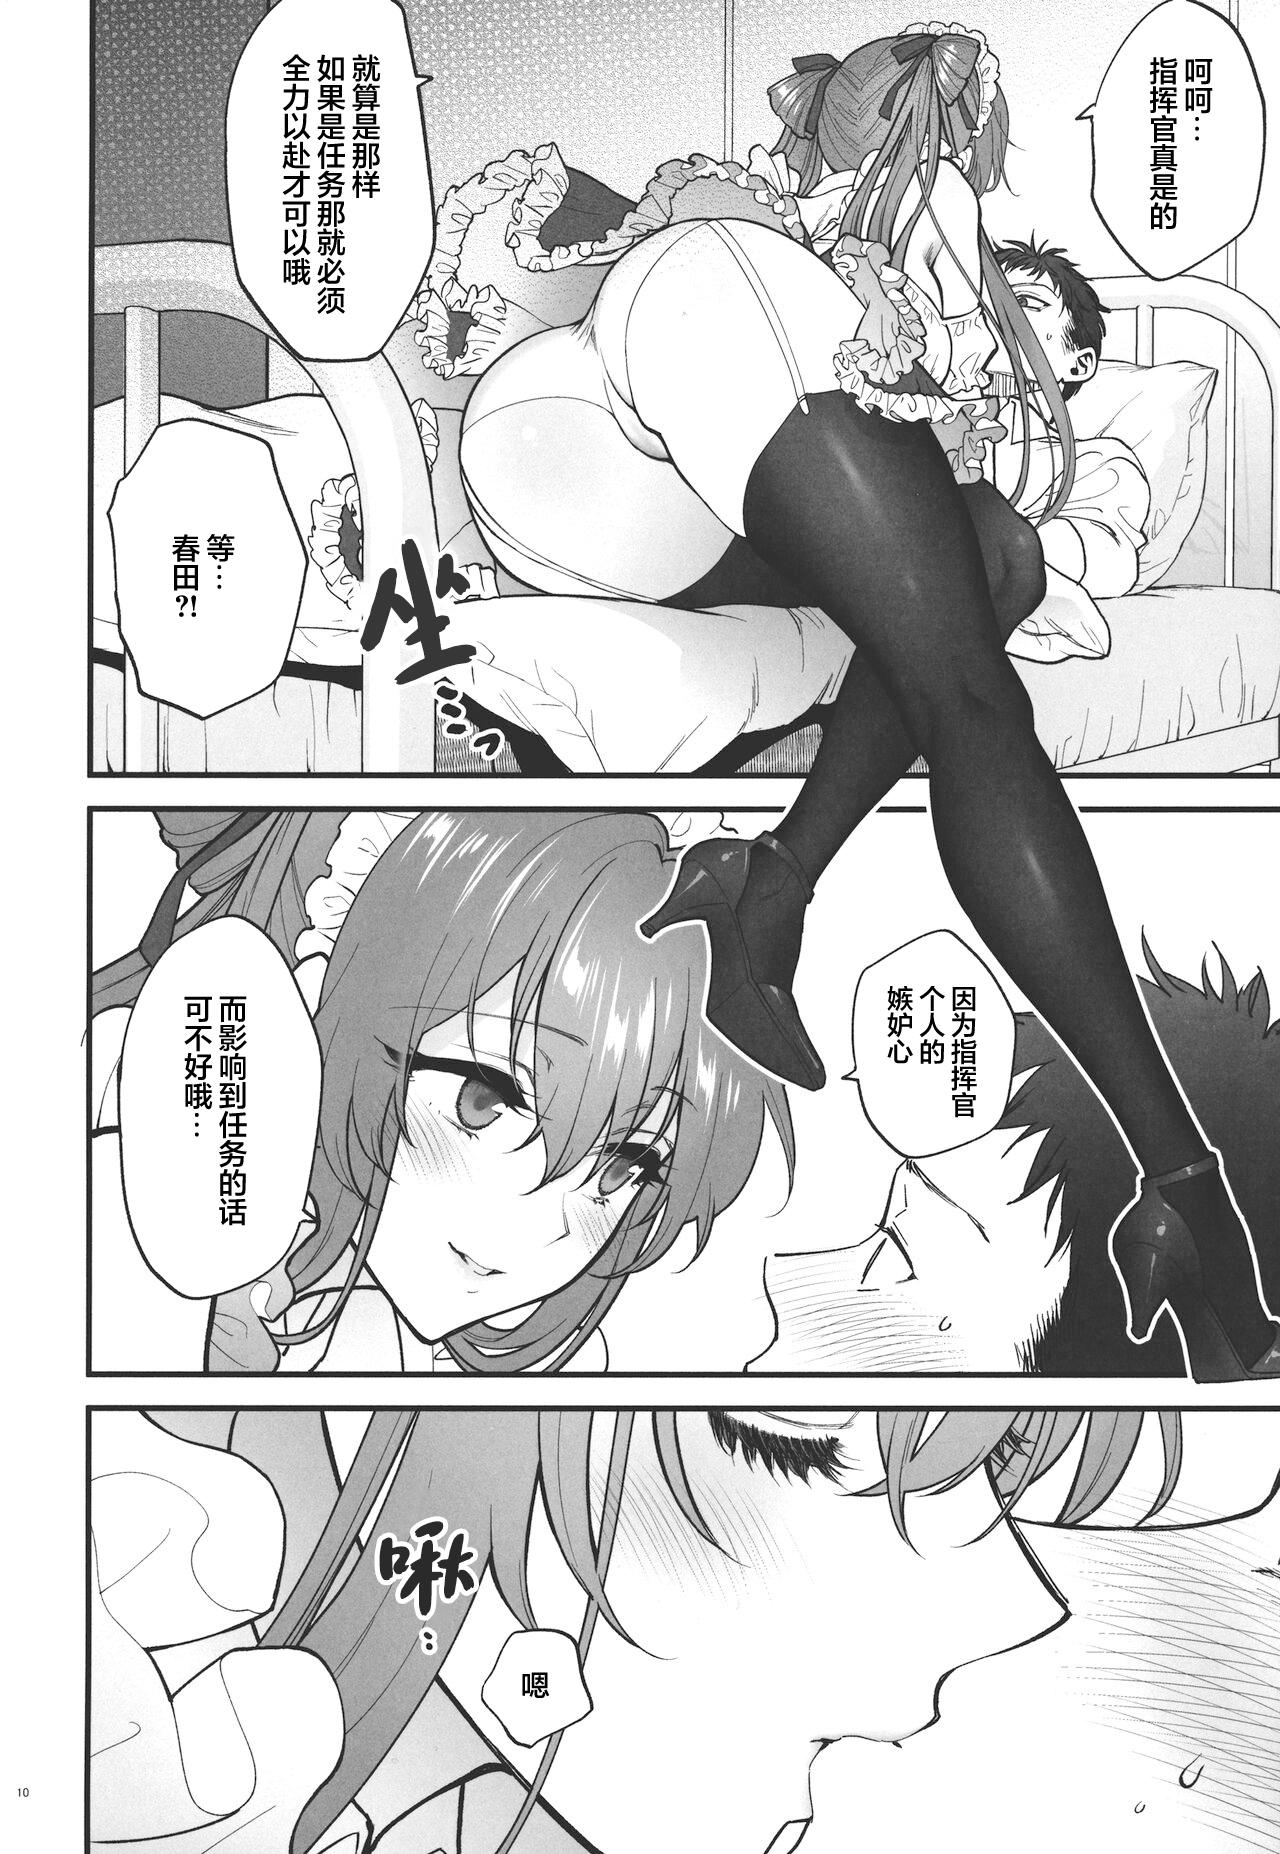 Perrito Make me Yours - Girls frontline Beauty - Page 9